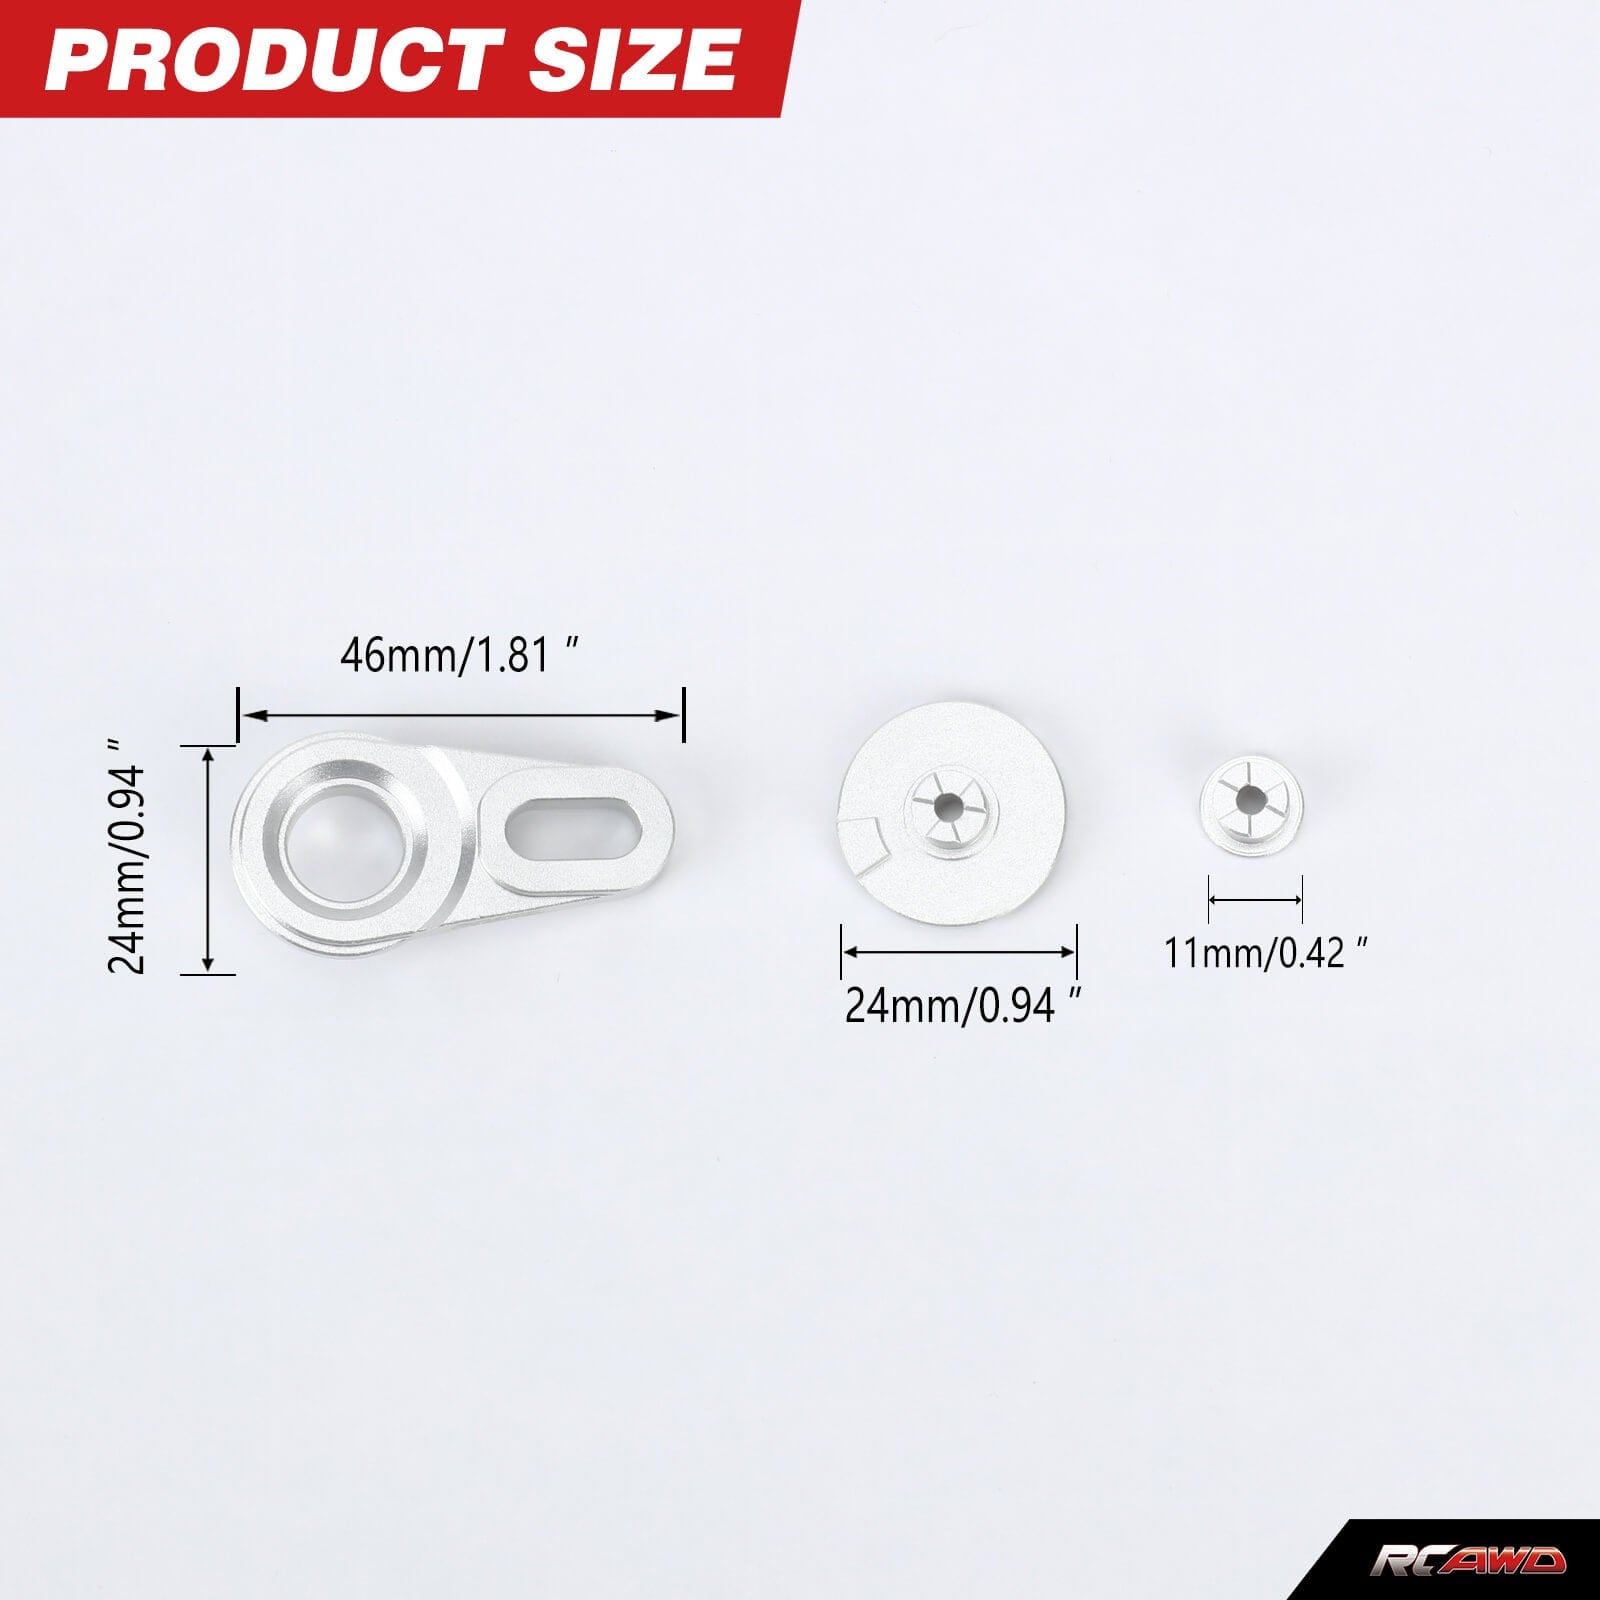 RCAWD 1/4 Losi Promoto-MX upgrades parts RCAWD 1/4 Losi Promoto-MX Upgrades Servo Saver Assembly for losi Motorcycle LOS261011S